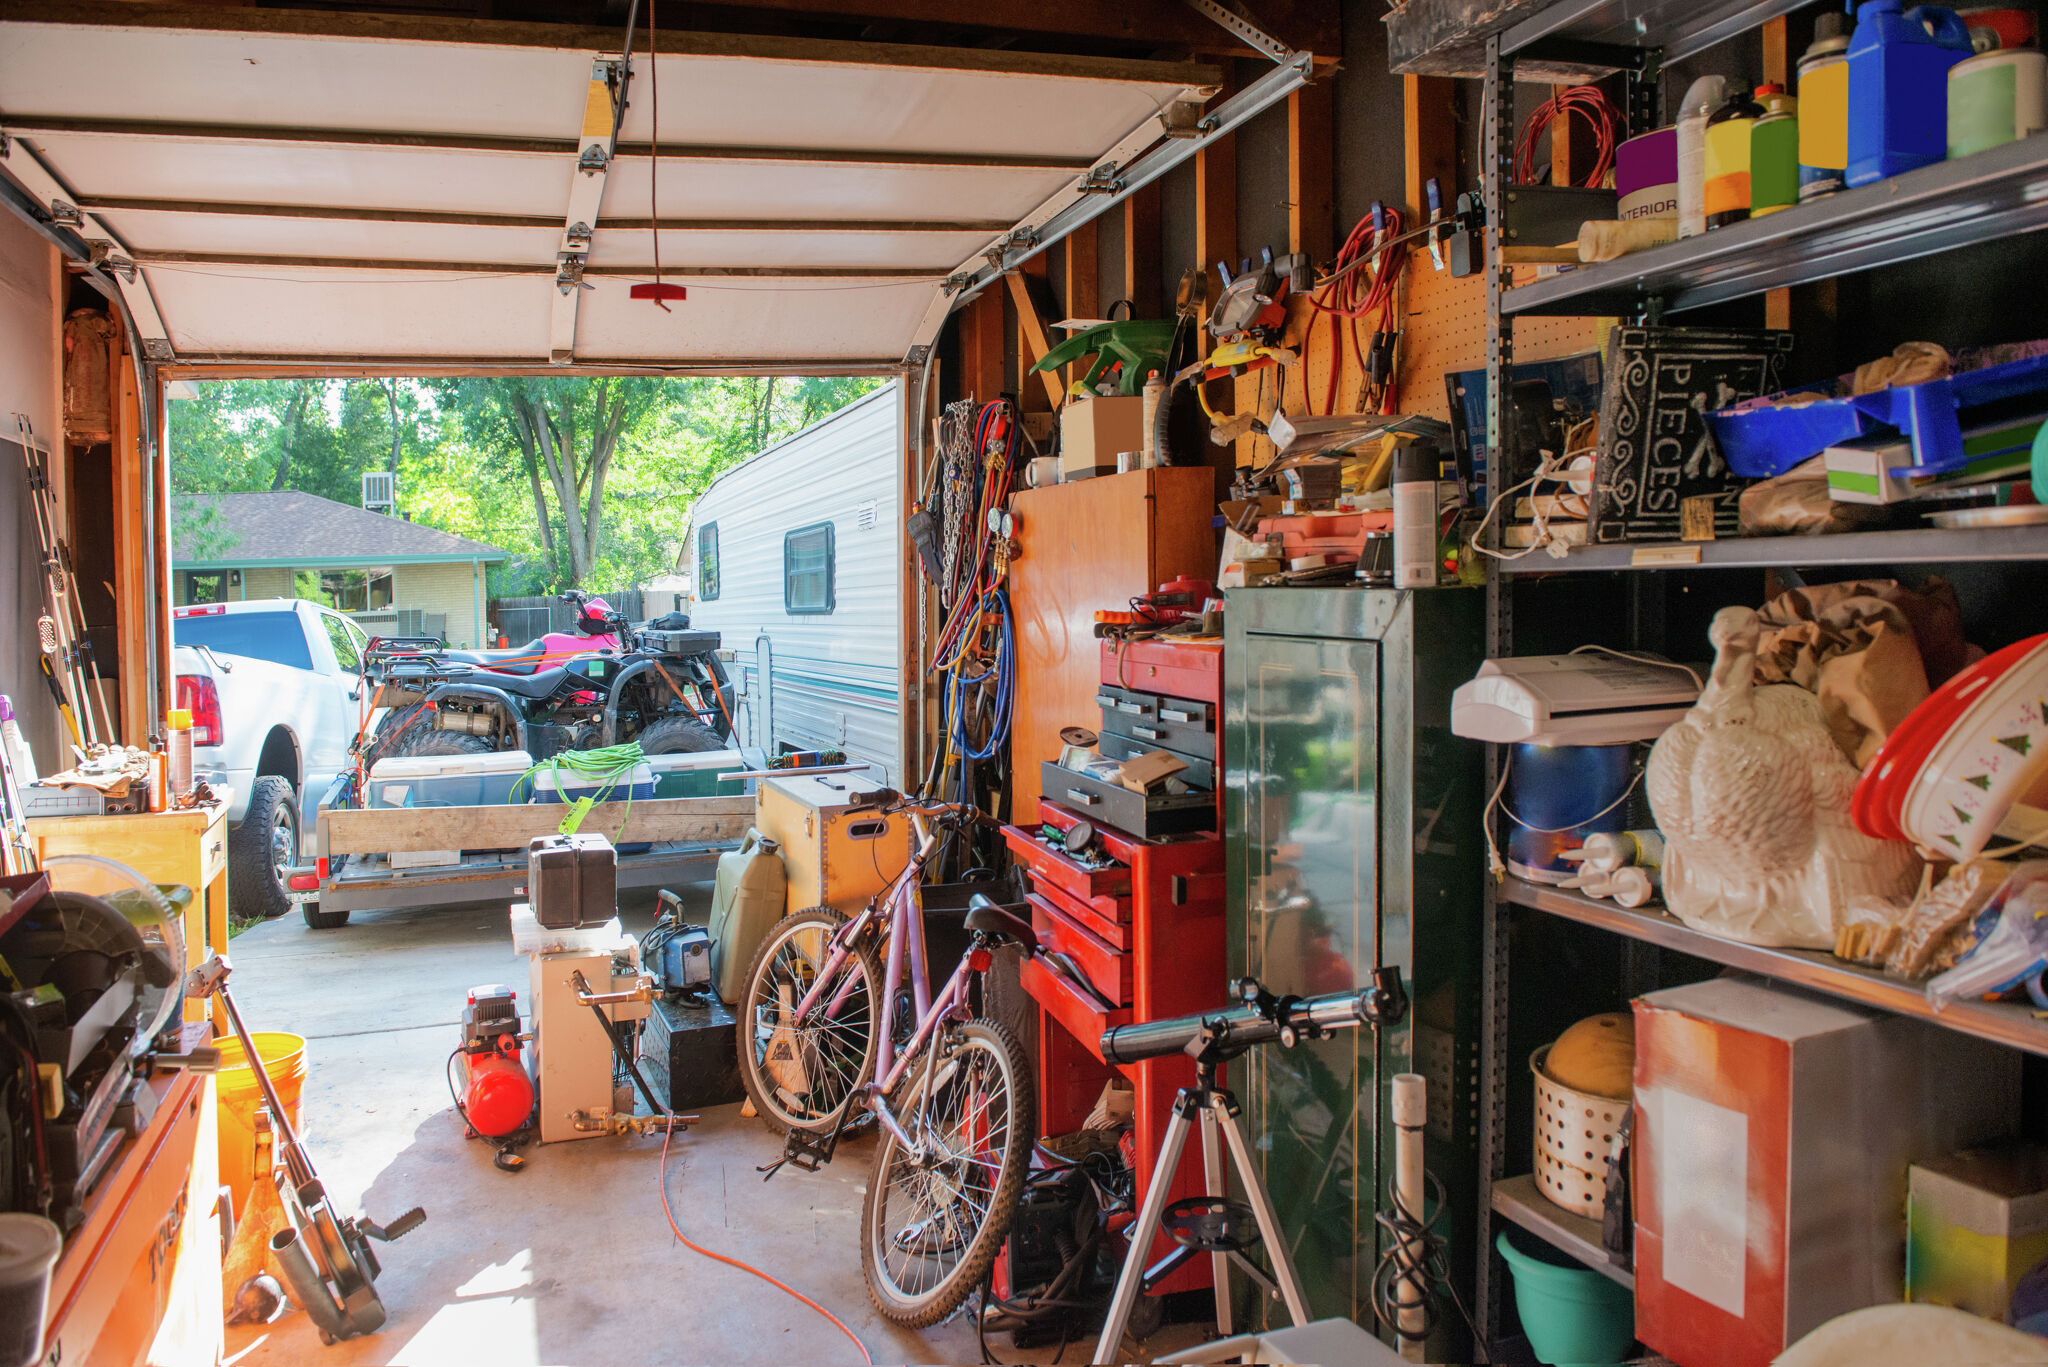 Garage Organization: Tackling Our Crazy Mess of a Garage - Driven by Decor